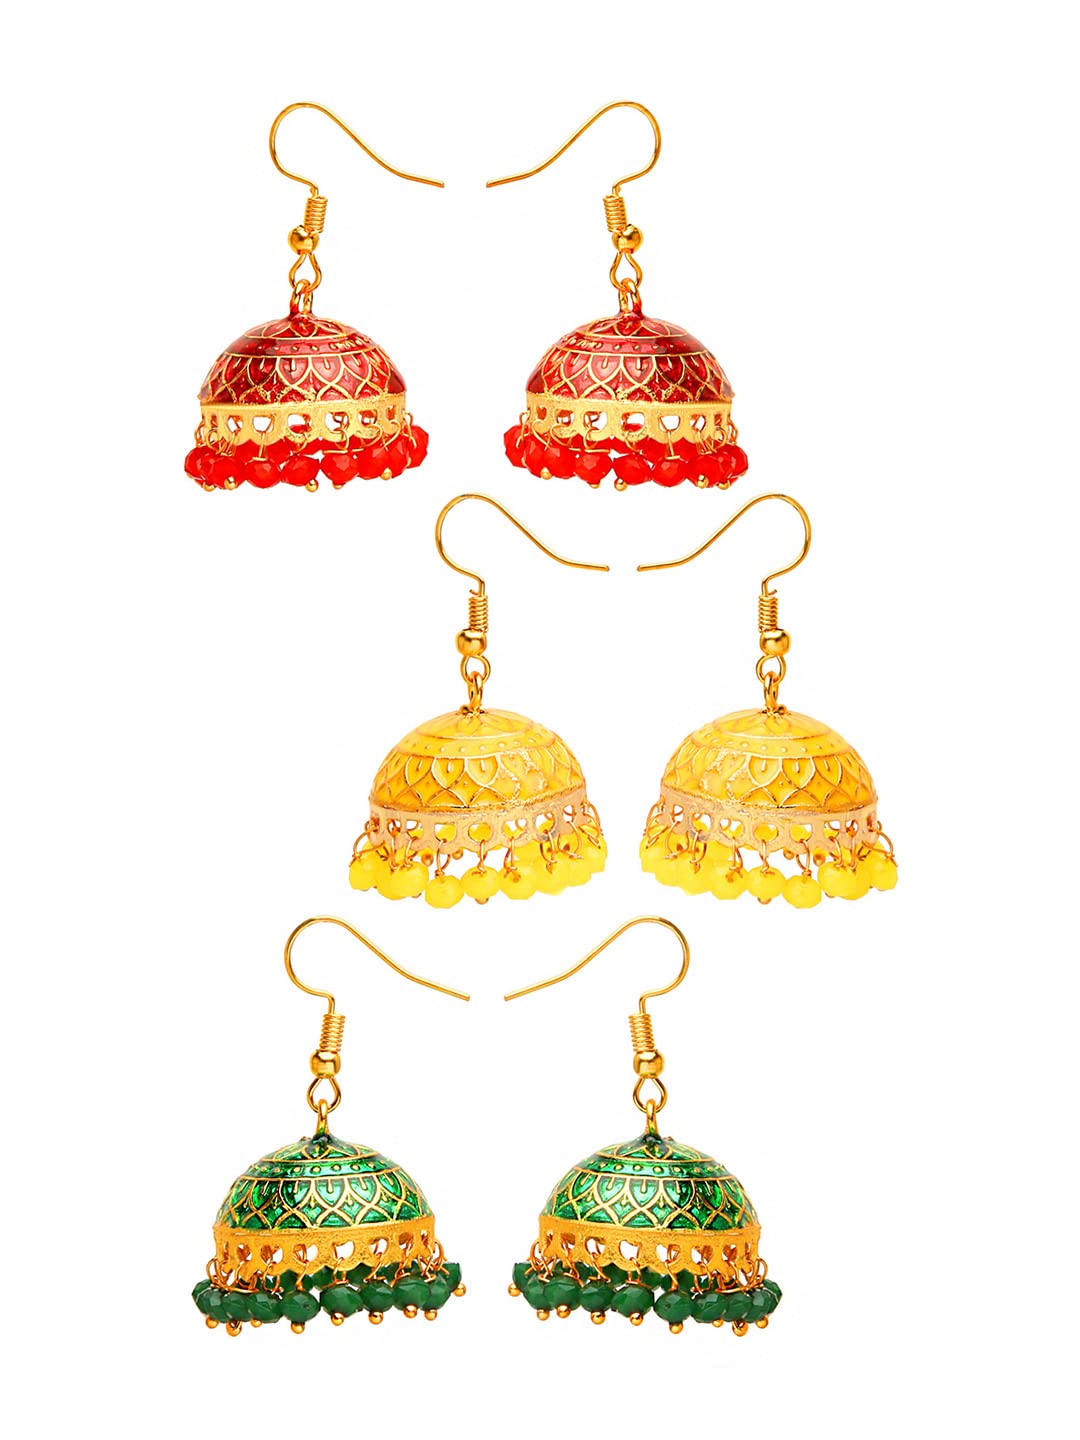 Yellow Chimes Meenakari Jhumka Earrings with Ethnic Design Gold Plated Traditional Beads Combo of 3 pair Jhumki Earrings for Women and Girls